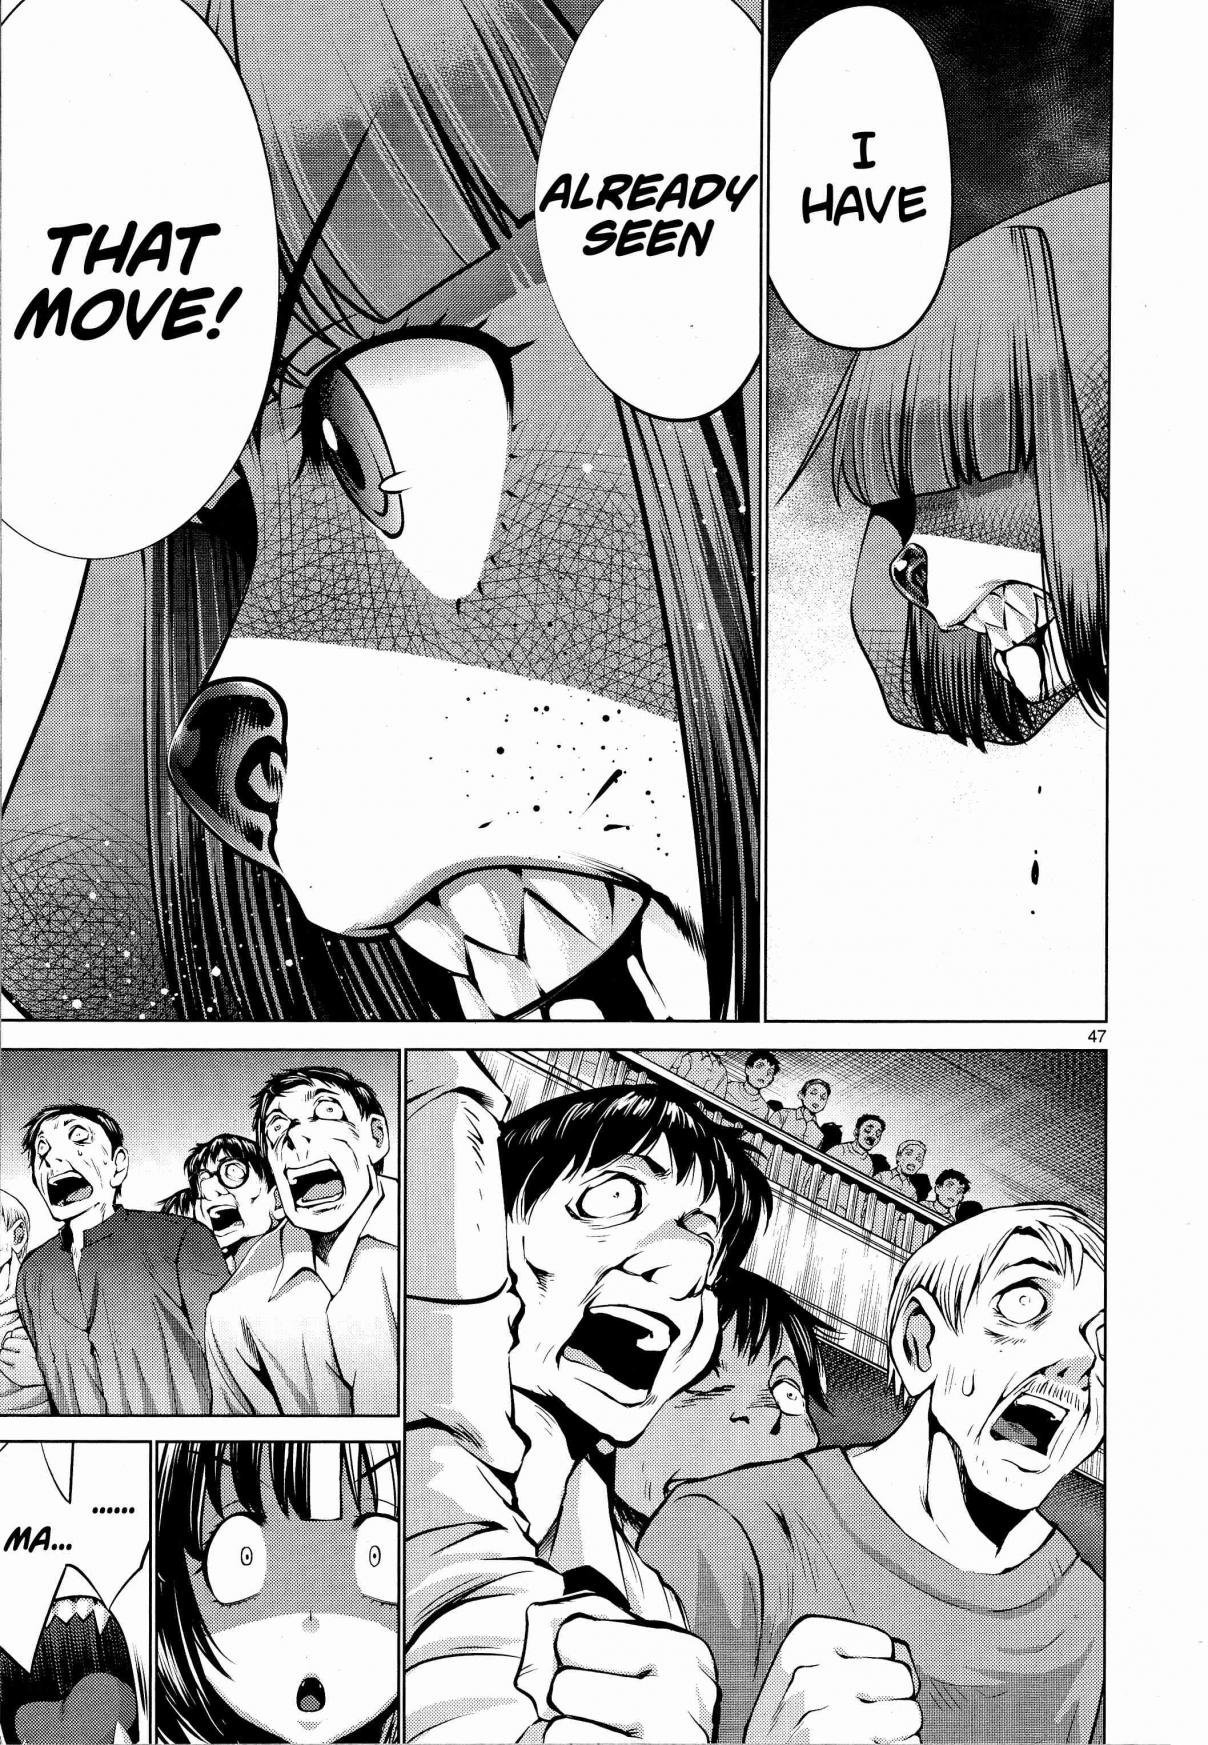 Killing Bites Vol. 16 Ch. 76 "You're Cuter and Stronger Than He Is"